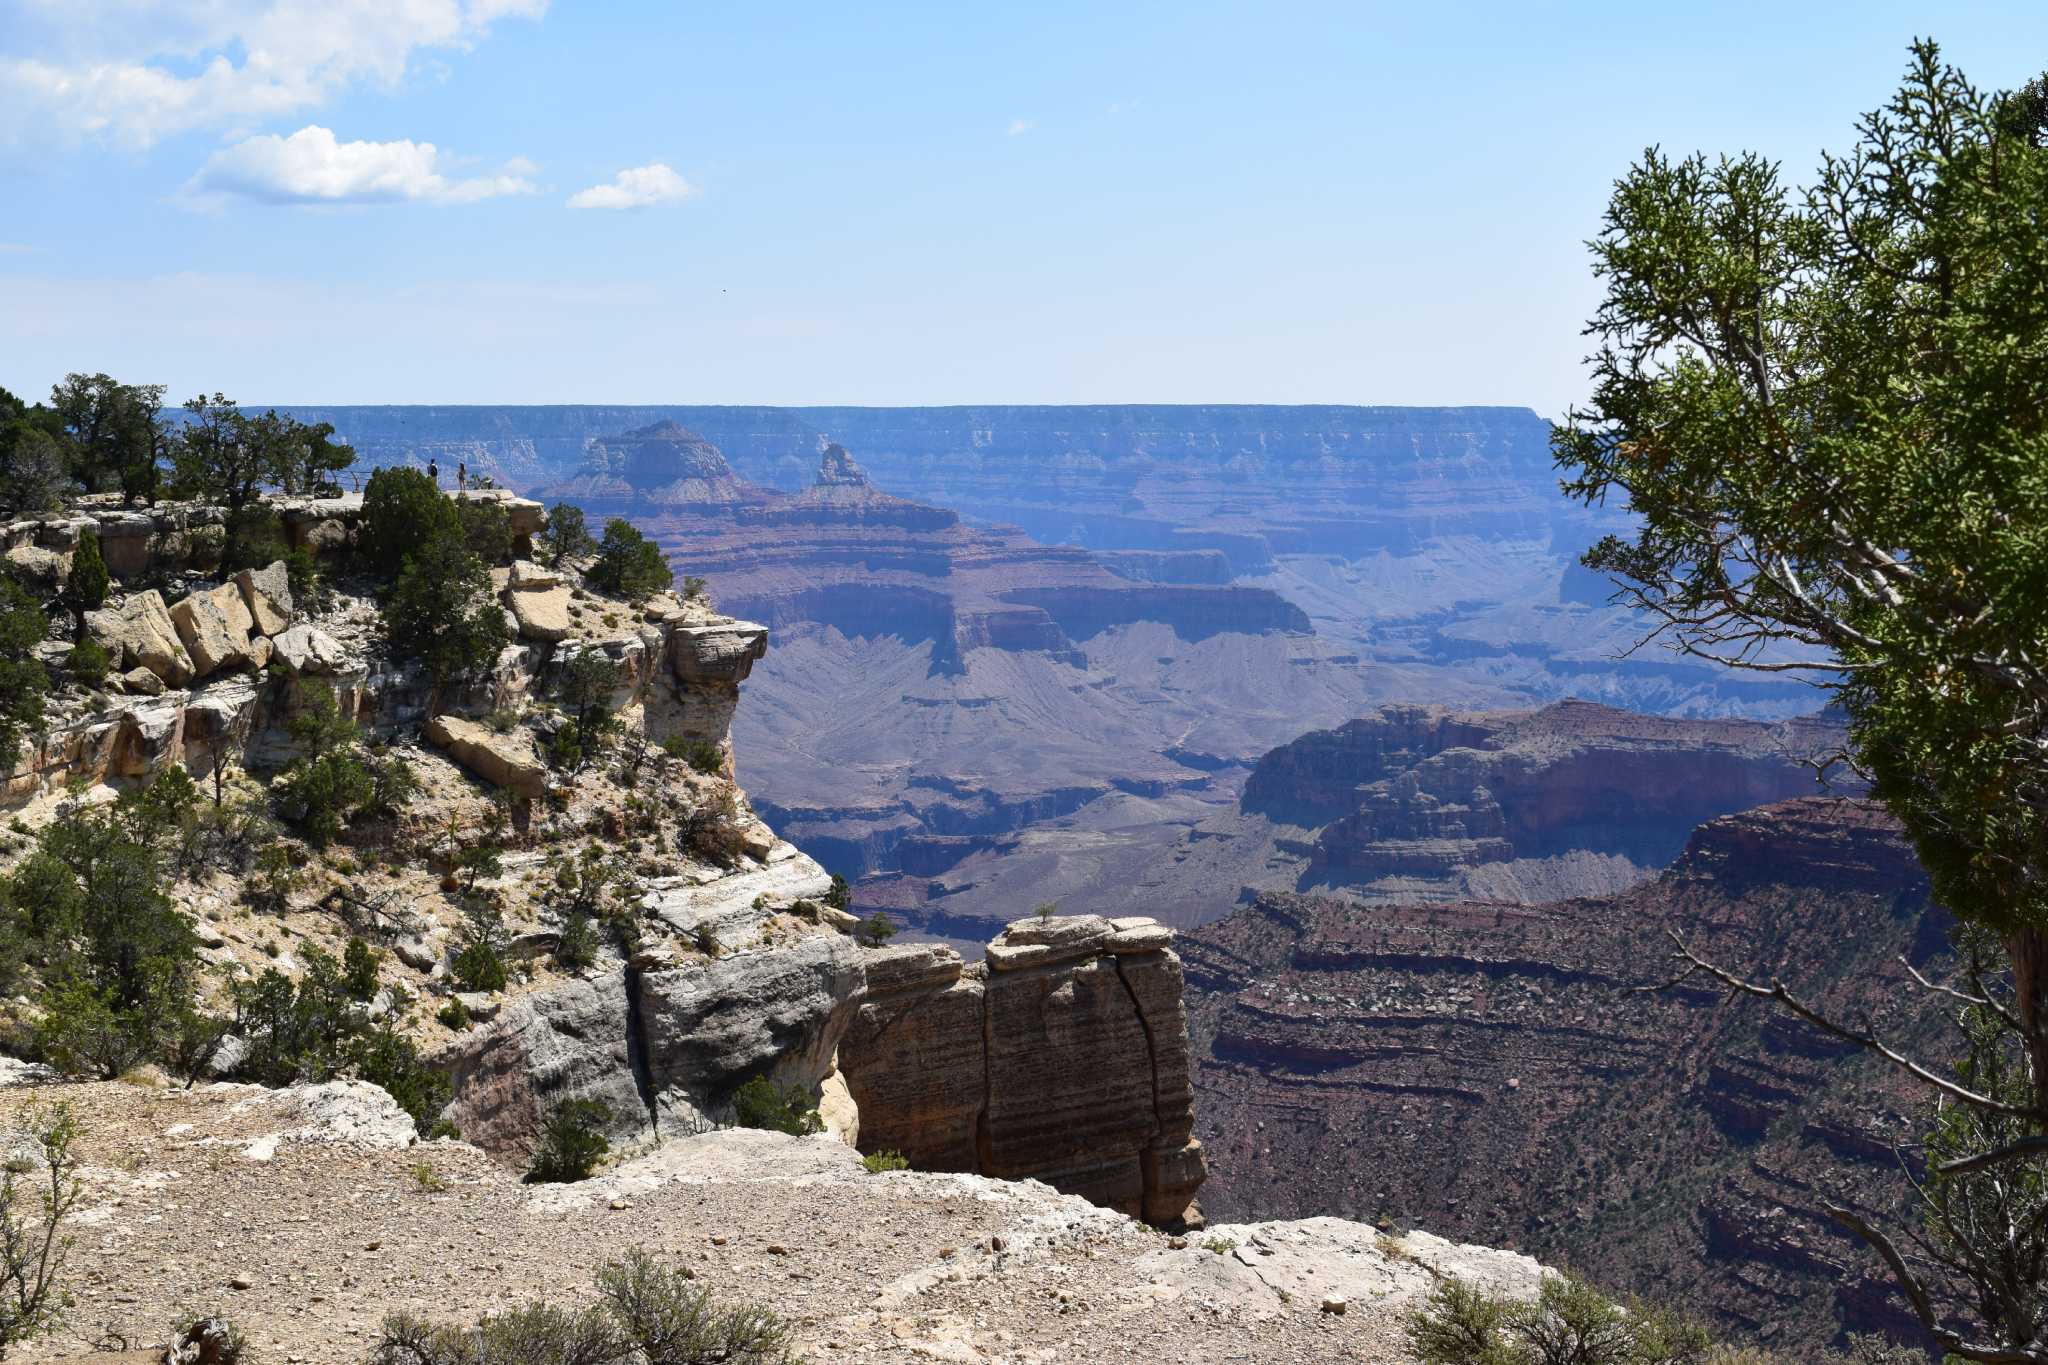 Grand Canyon is even grander without a car